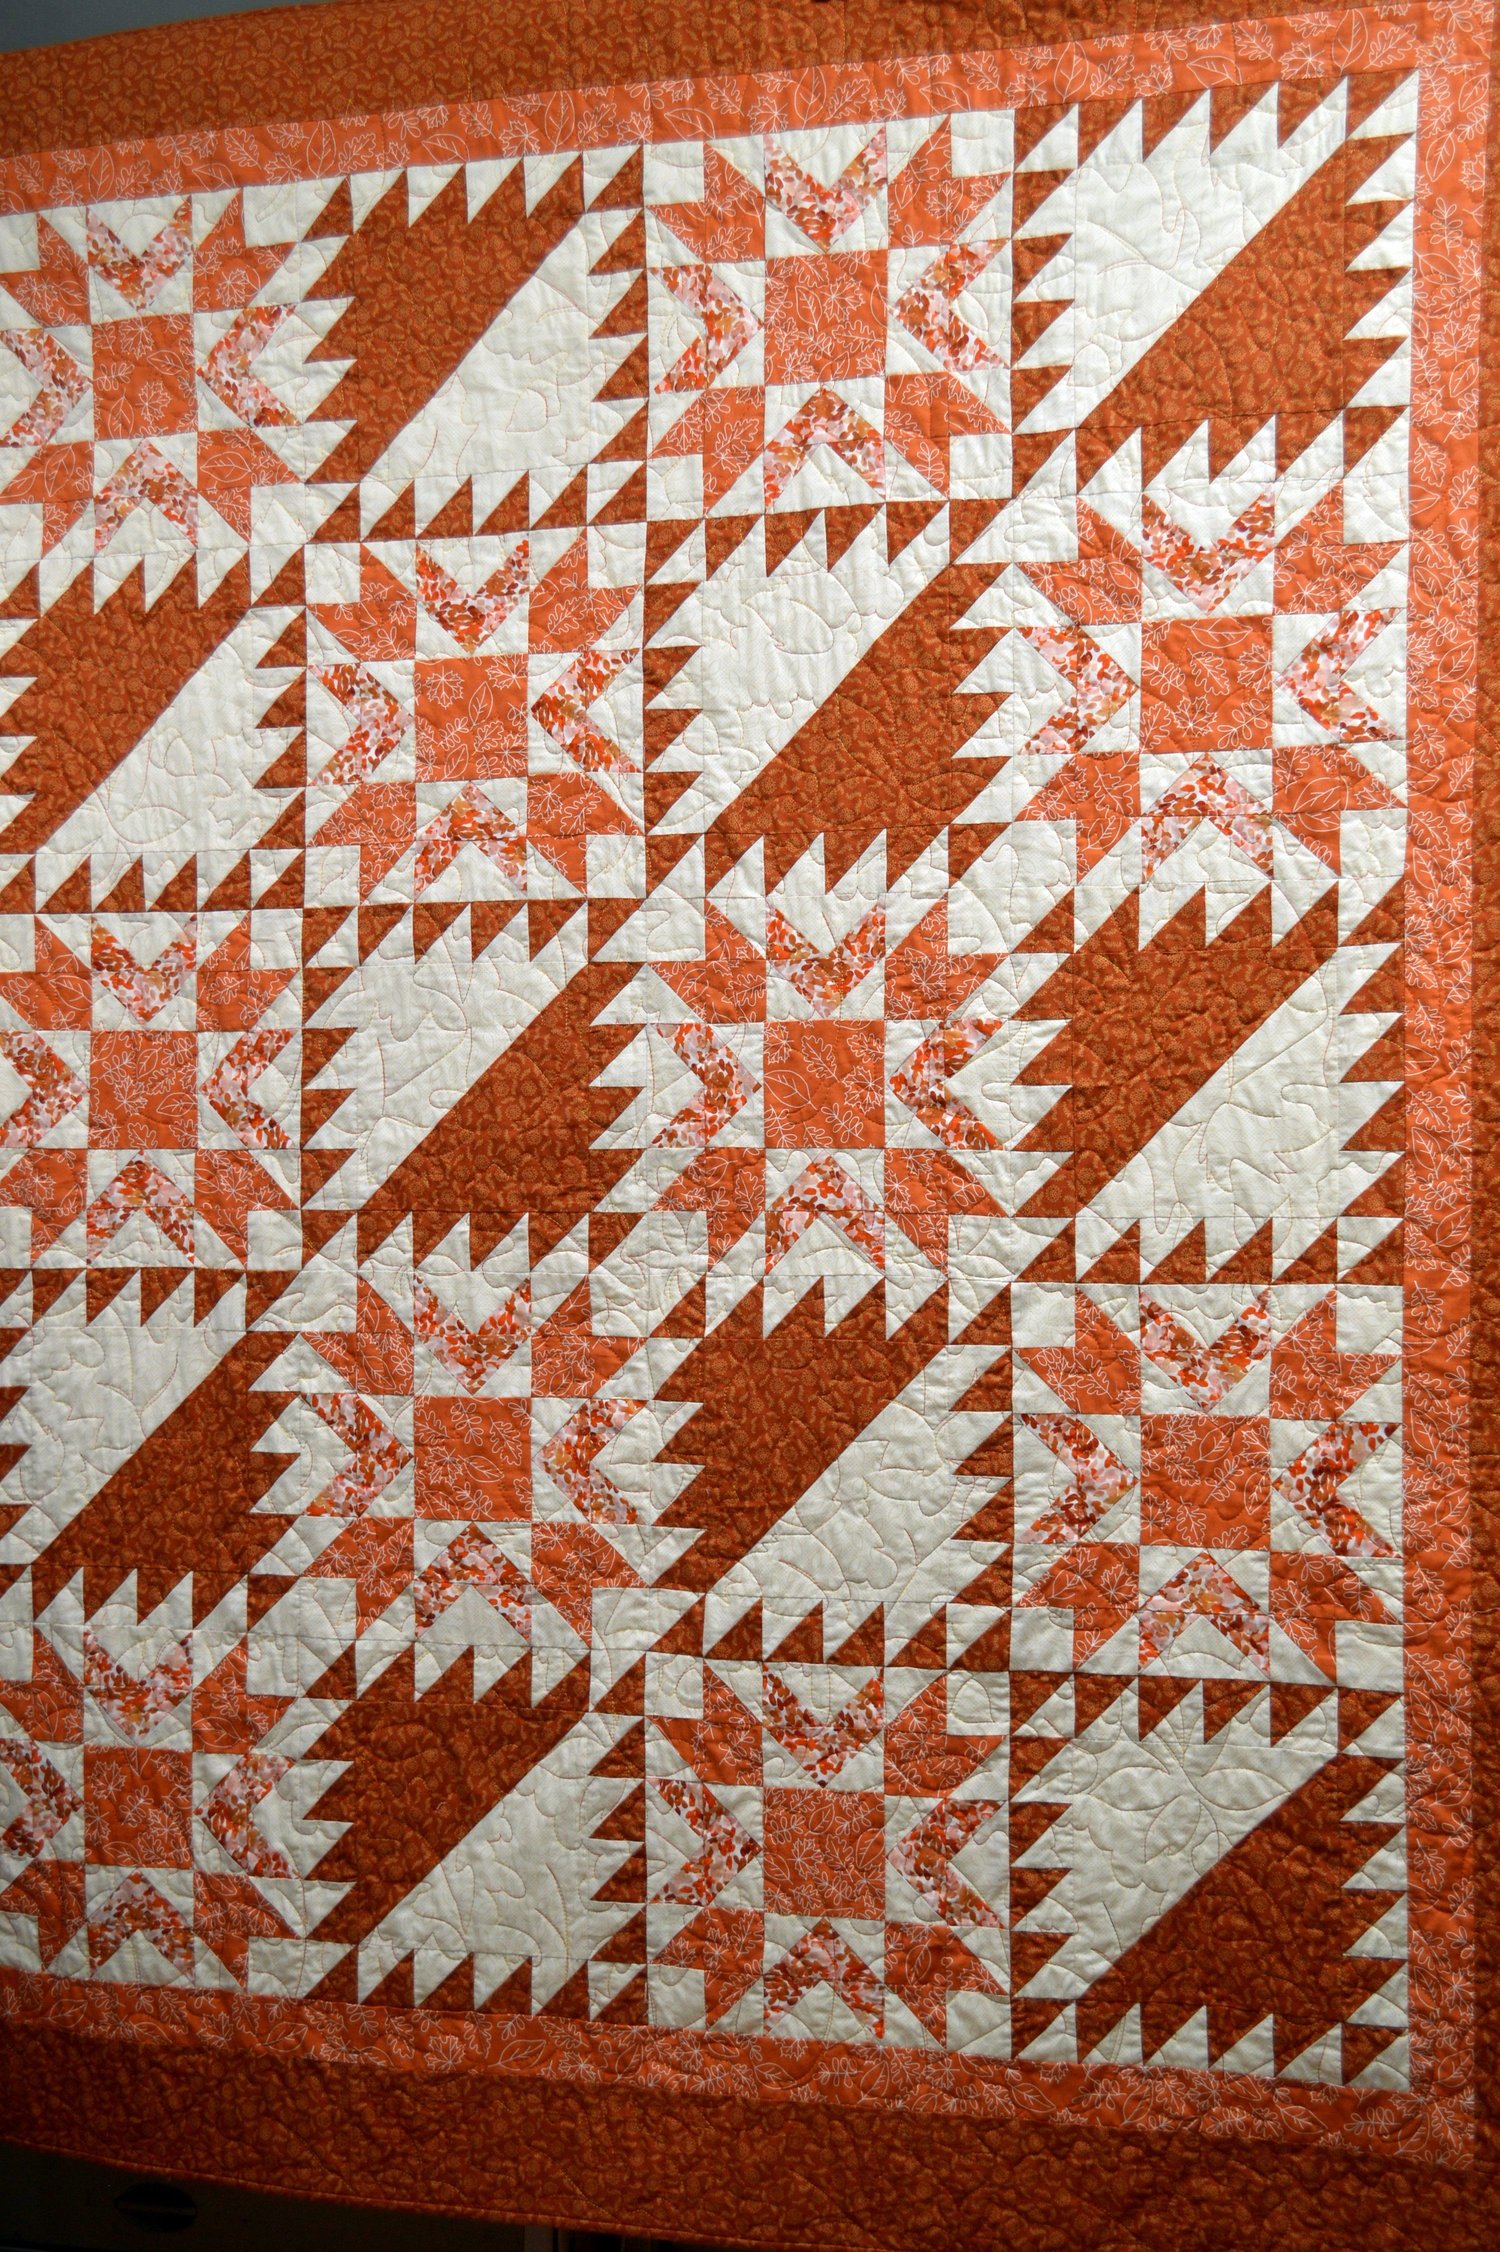 Falling Leaves quilt. Pattern name is Southern Belle.